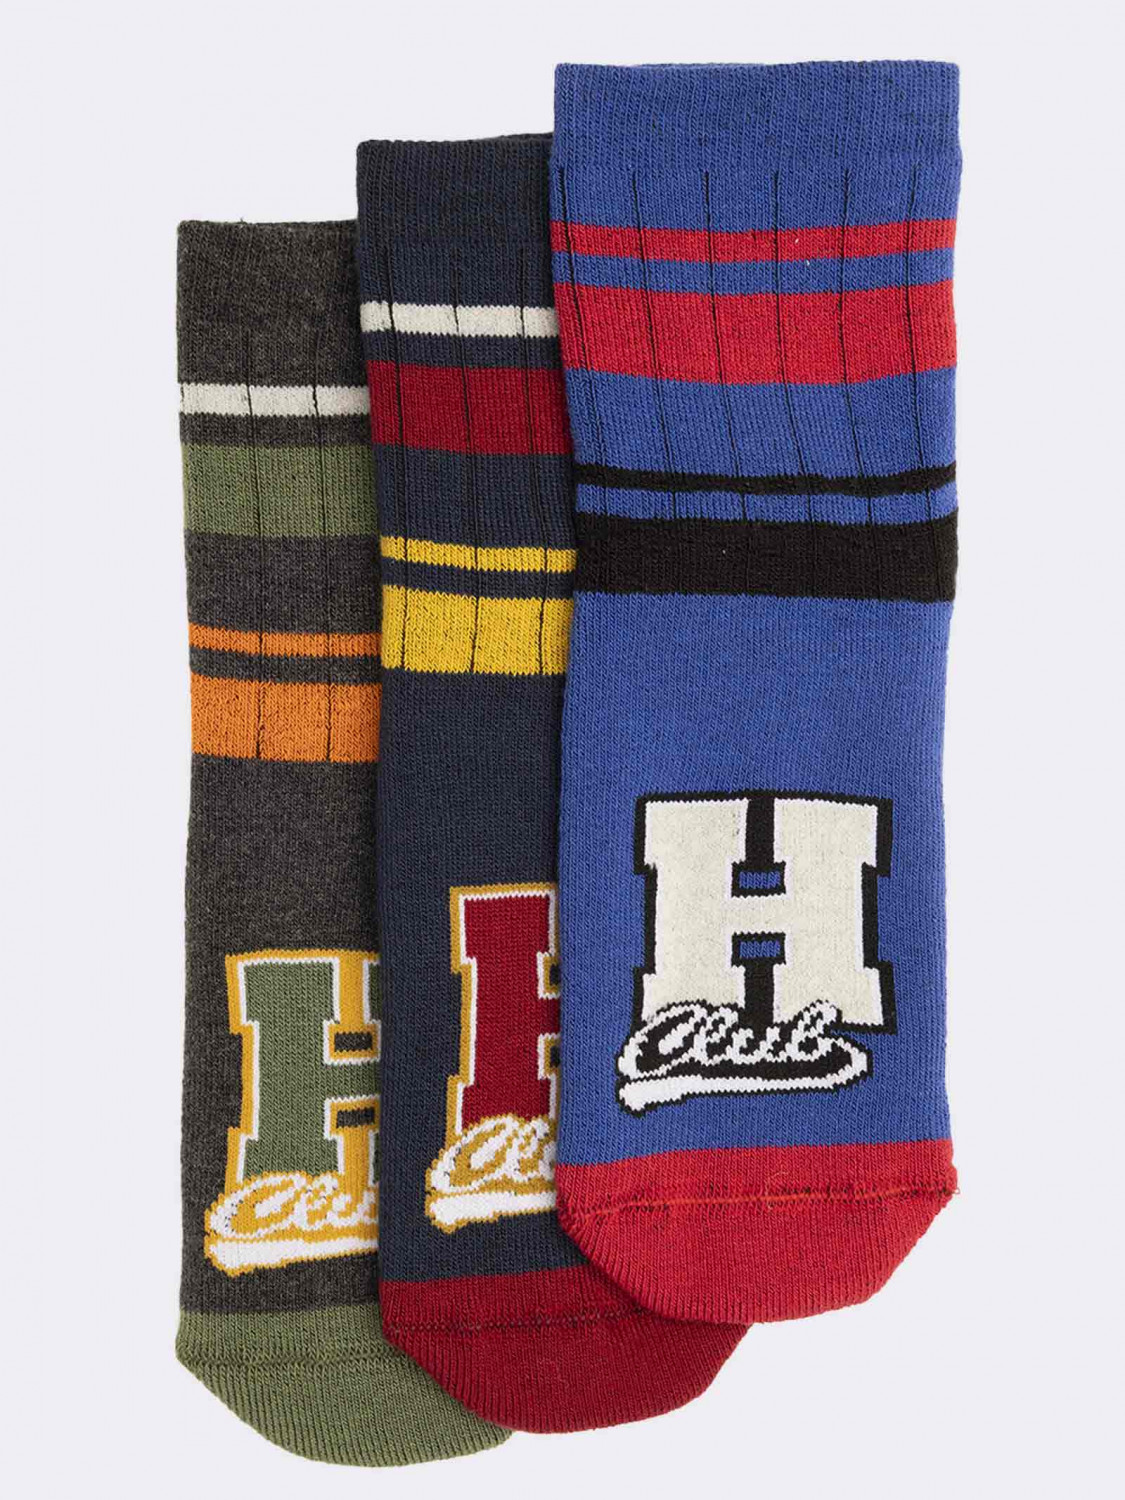 Three Club H patterned baby socks in warm cotton